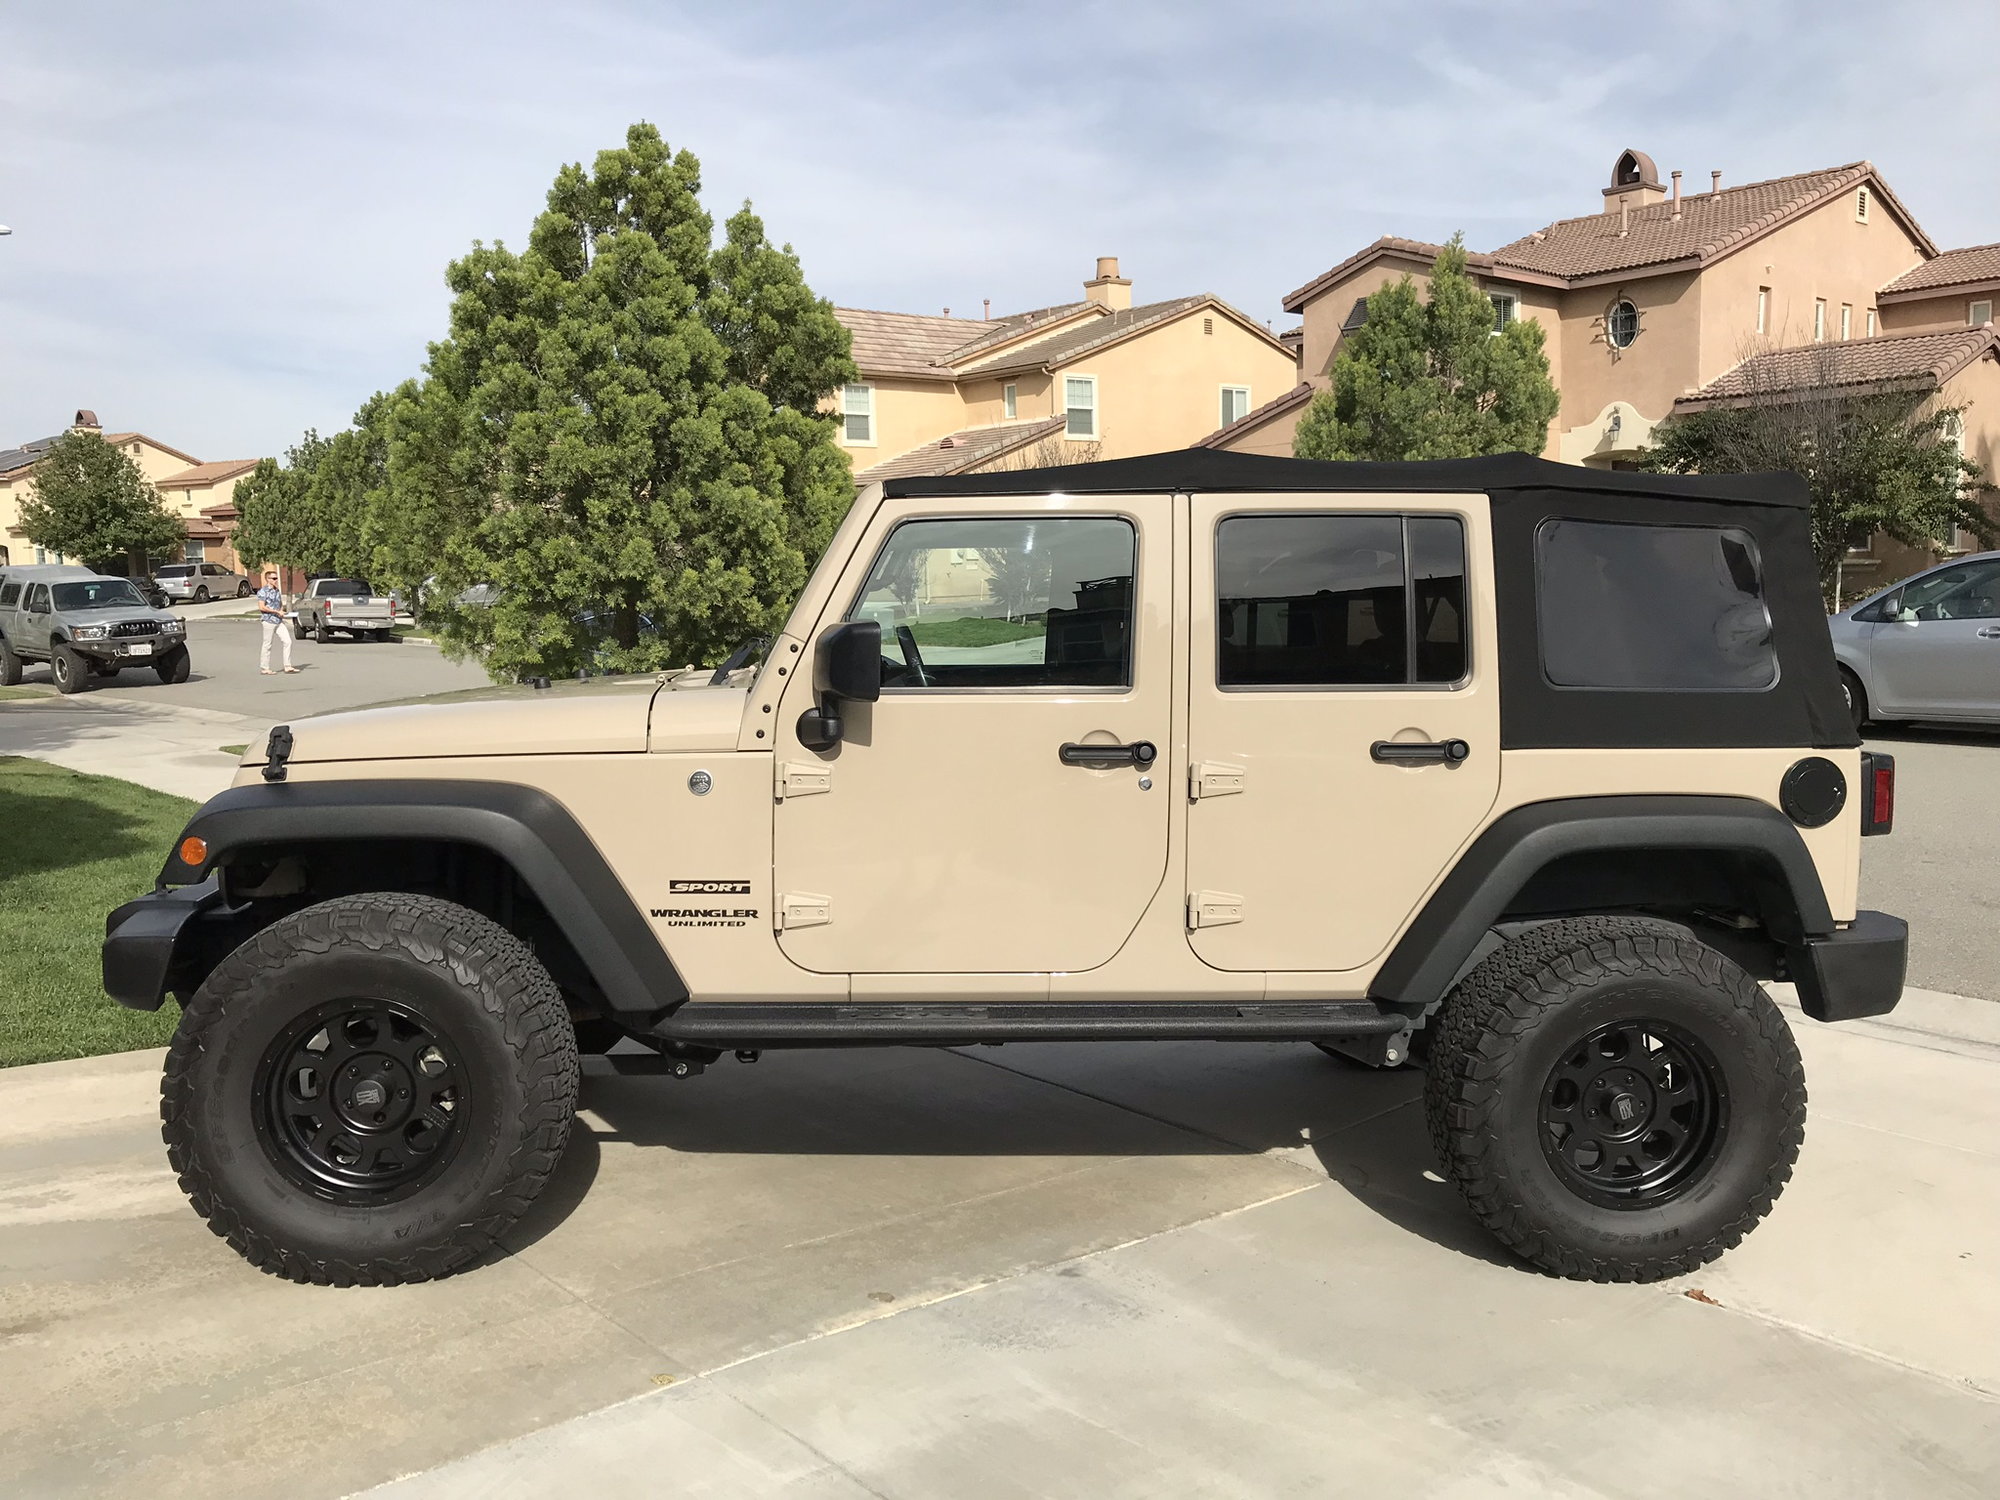 2016 Jeep Wrangler - Wrangler Unlimited Sport S Softtop - AEV Lift 35" Tires - Used - VIN 1C4BJWDG6GL274781 - 20,200 Miles - 6 cyl - 4WD - Automatic - SUV - Other - Eastvale, CA 92880, United States